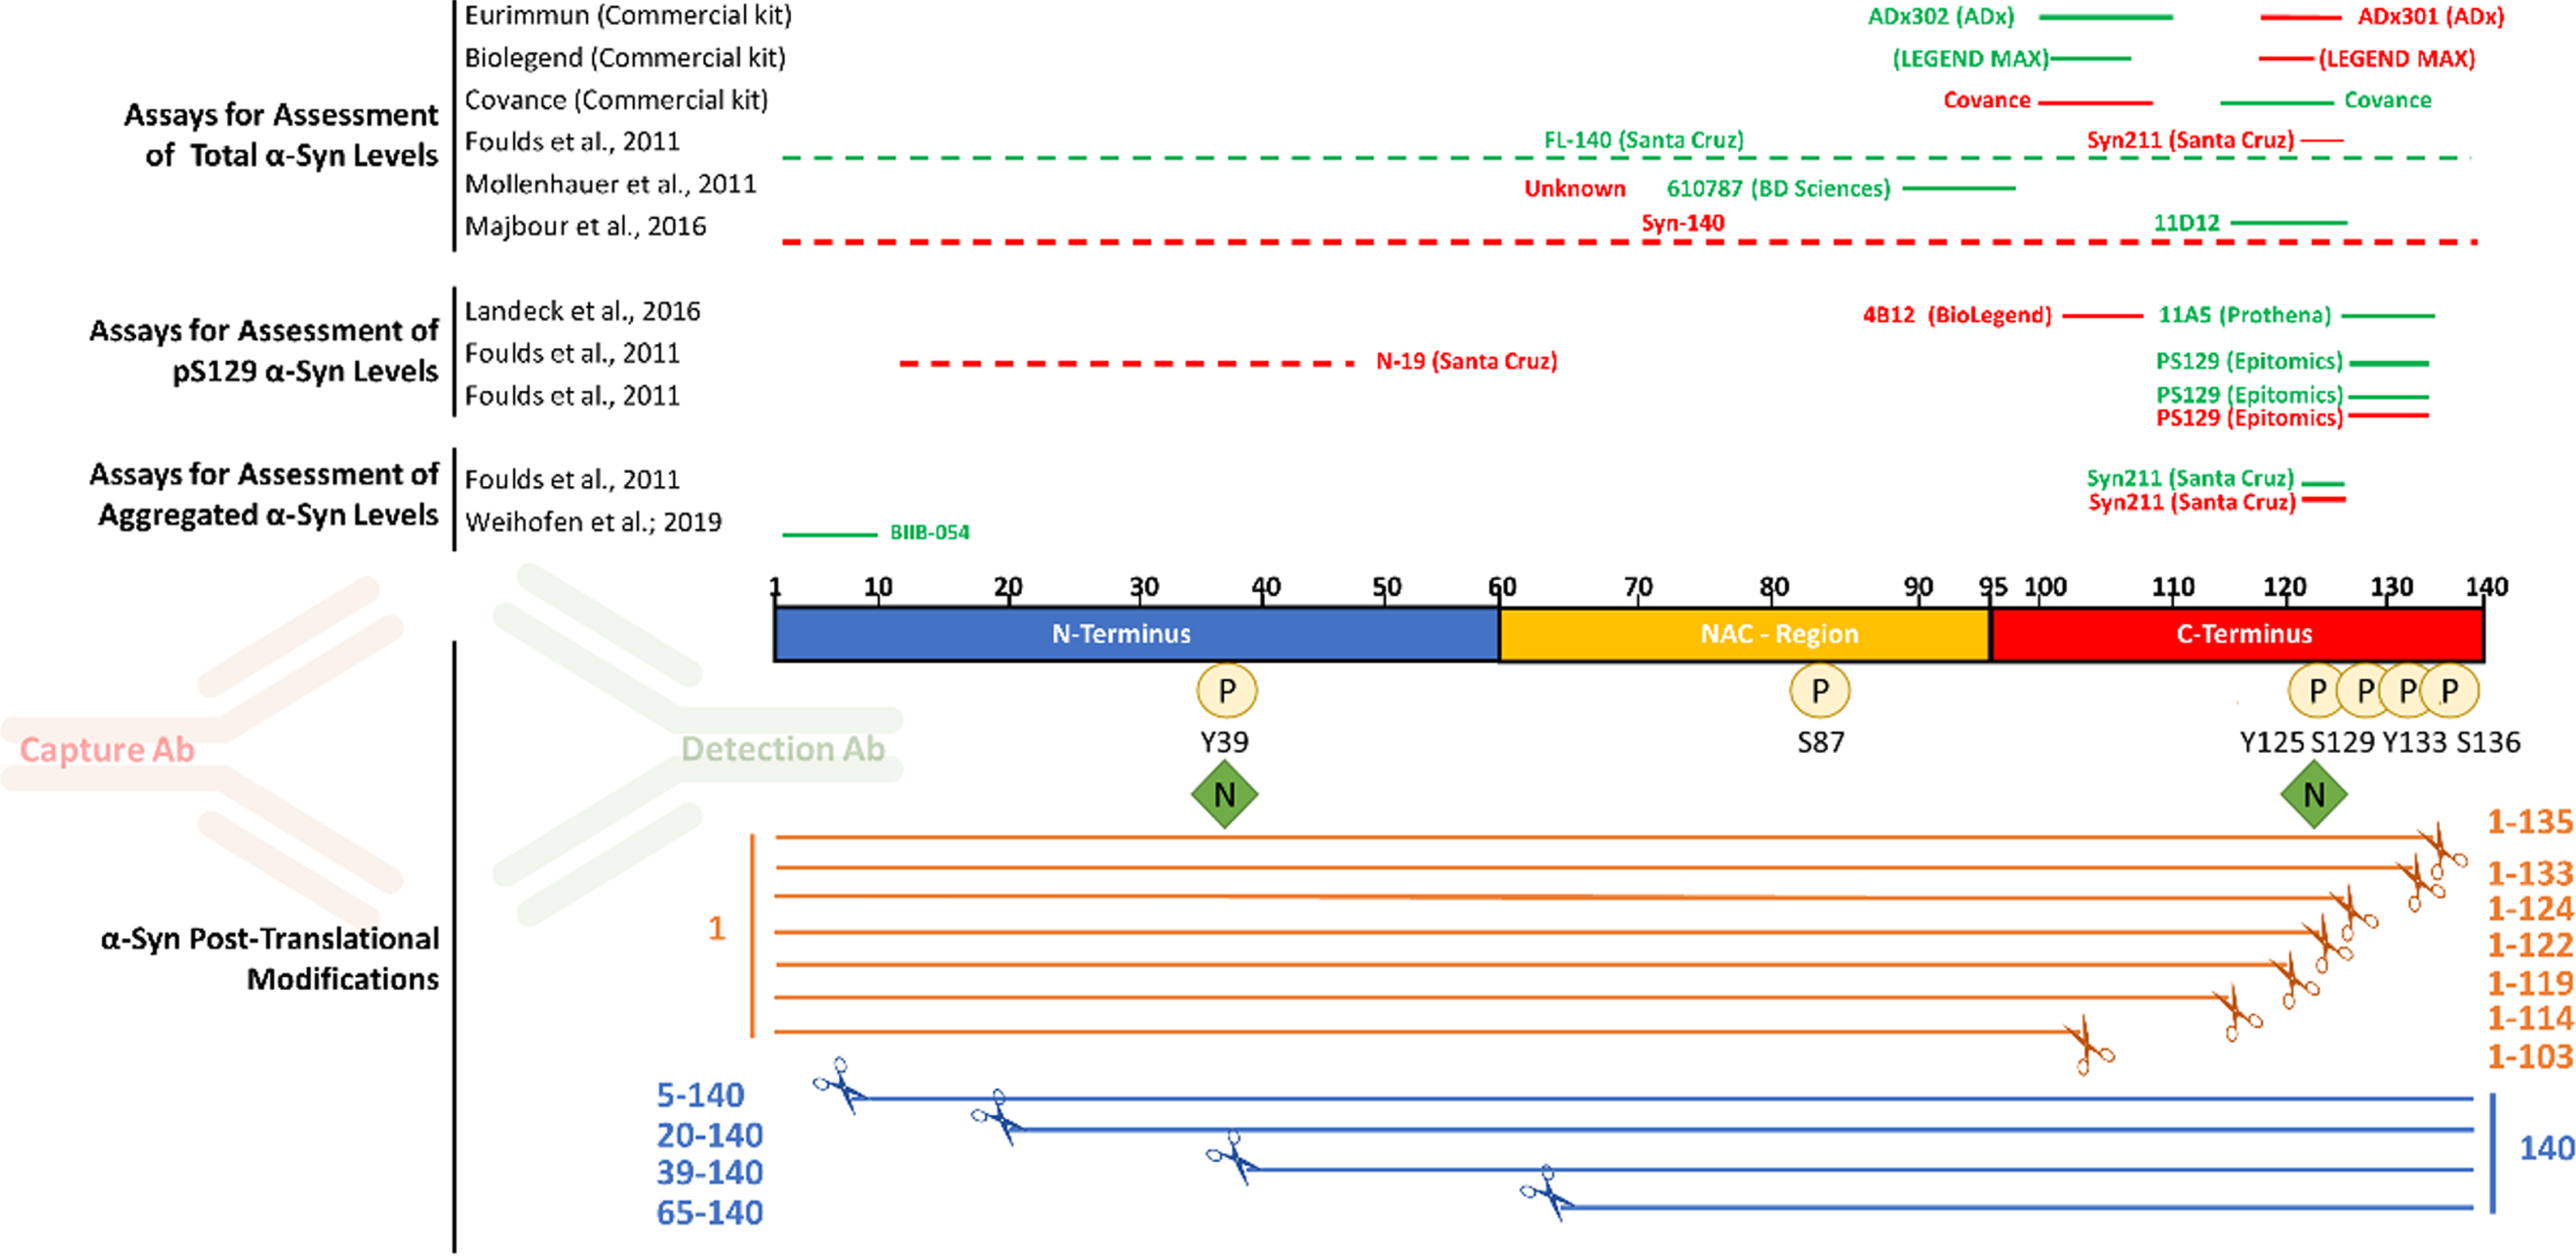 Most antibodies used in immunoassays target the C-terminal post-translationally modified region of αSYN. The main αSYN PTMs (phosphorylation, nitration, and truncation) are depicted. Red and green bars above the sequence of αSYN show the epitopes of capture and detection antibodies, respectively, that have been used in immunoassays to measure total αSYN, pS129 αSYN, and aggregated αSYN levels in human biological specimens.